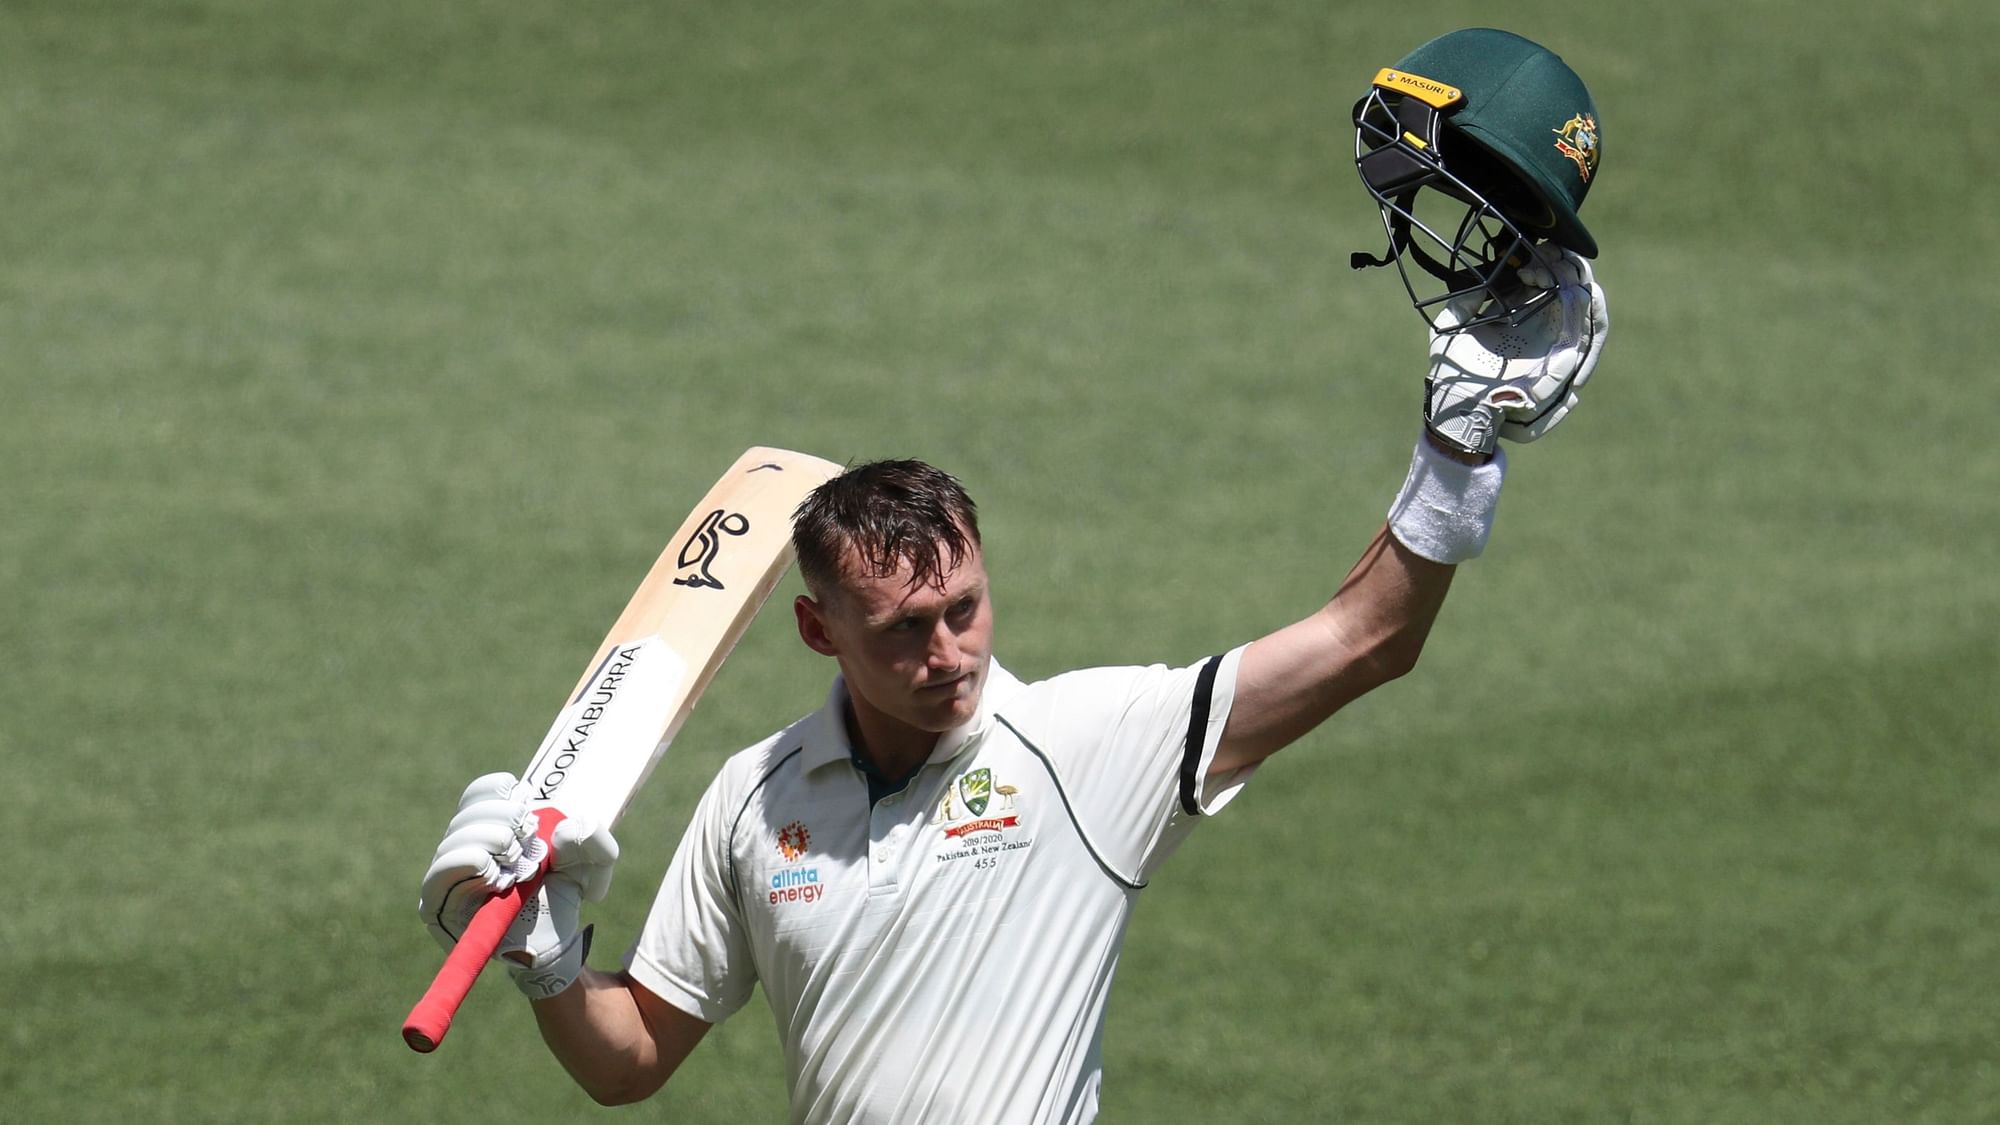 Marnus Labuschagne hasn’t featured for Australia in limited-overs matches as yet, but has registered an impressive run of scores in Tests.